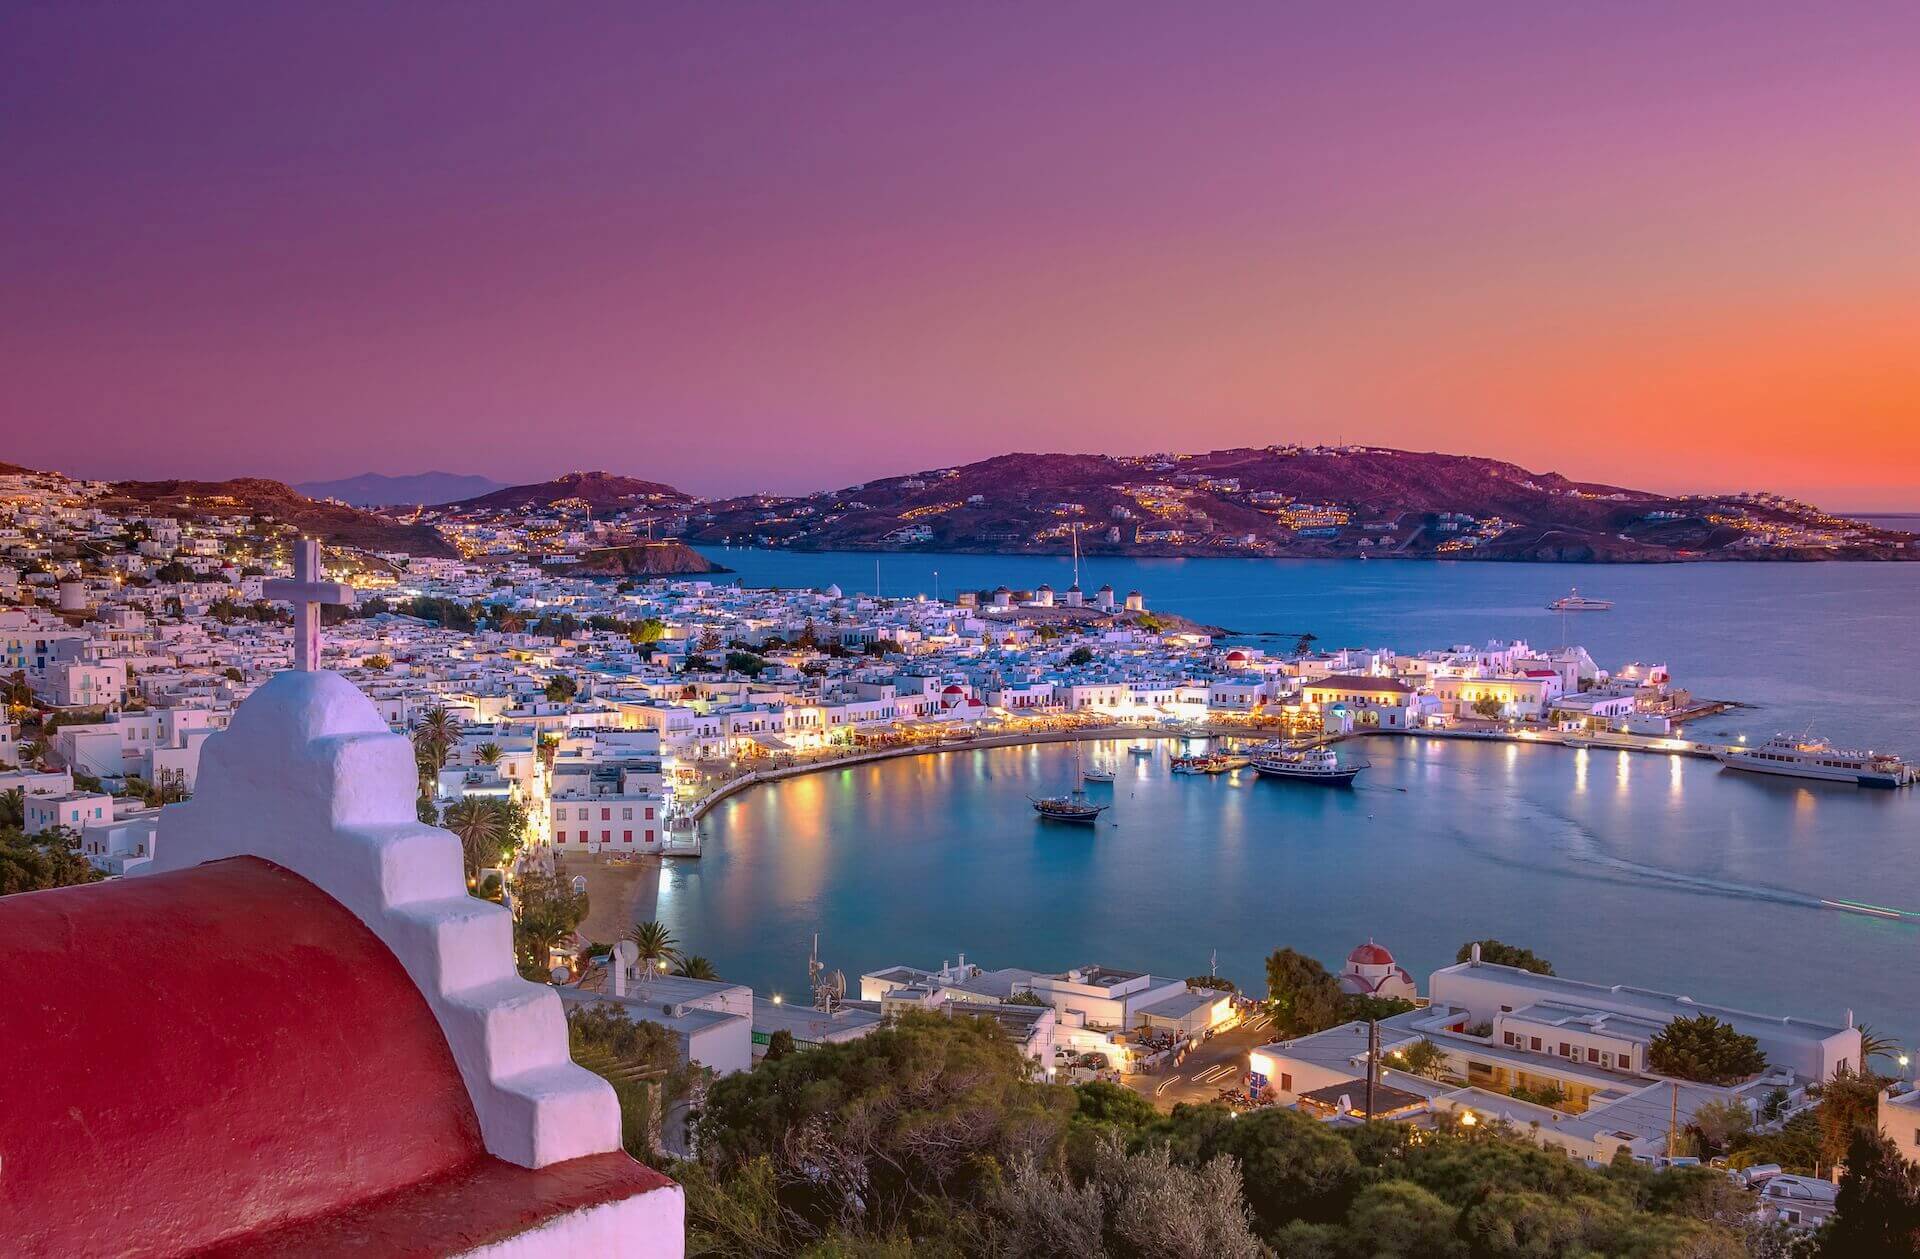 View of the Mykonos town at night